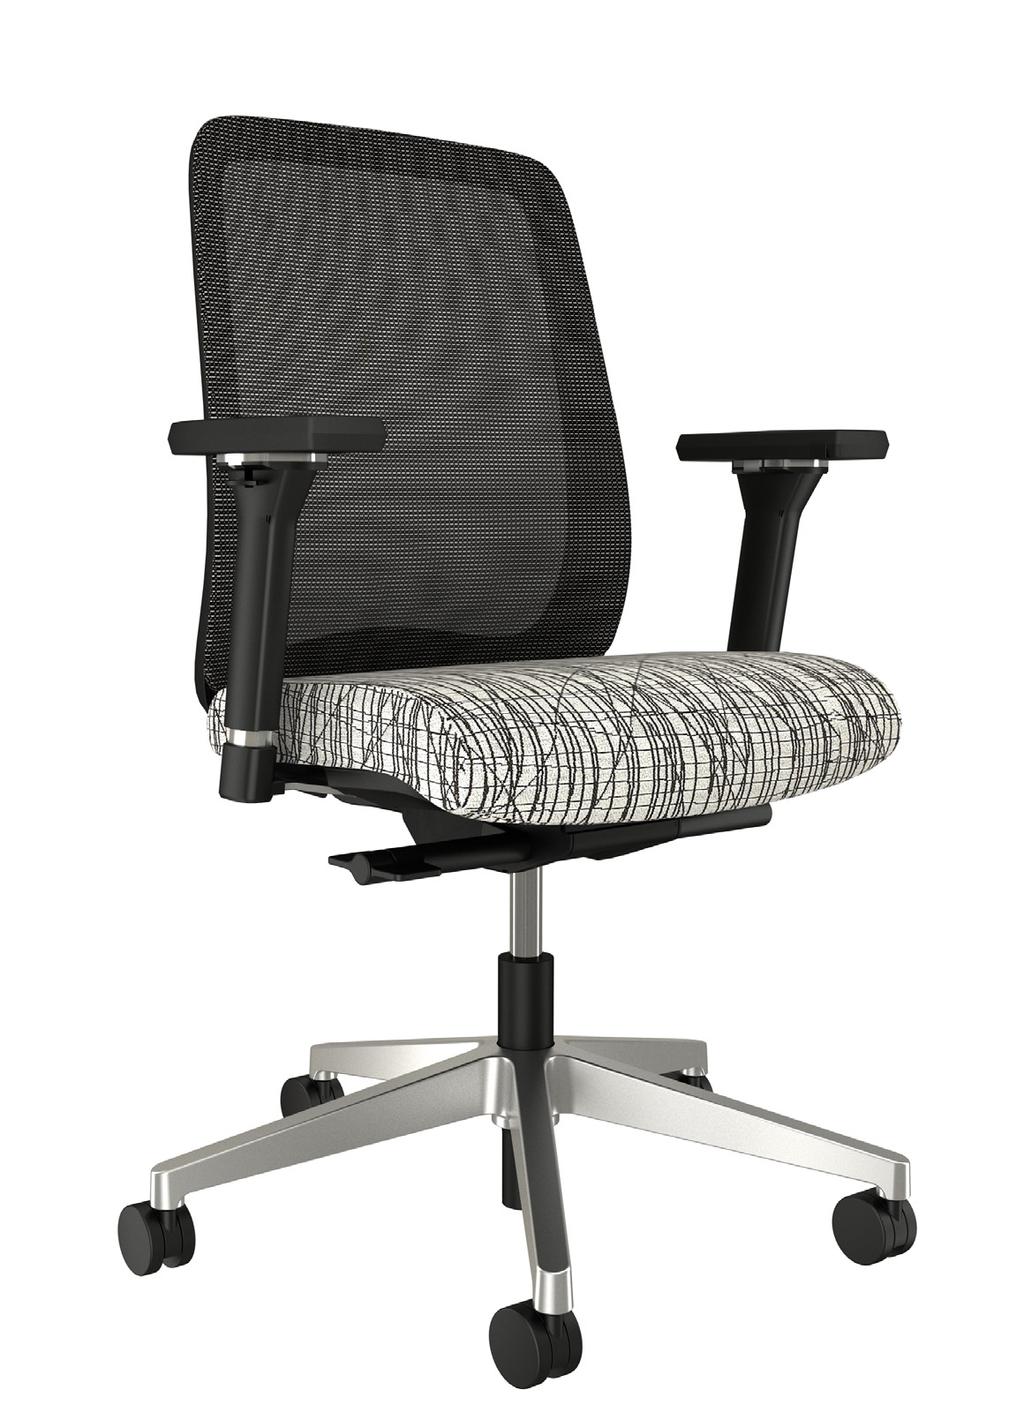 Comfortable to the core, Bolton comes with a generous seat cushion, ample lumbar support, adjustable arms and seat height, and